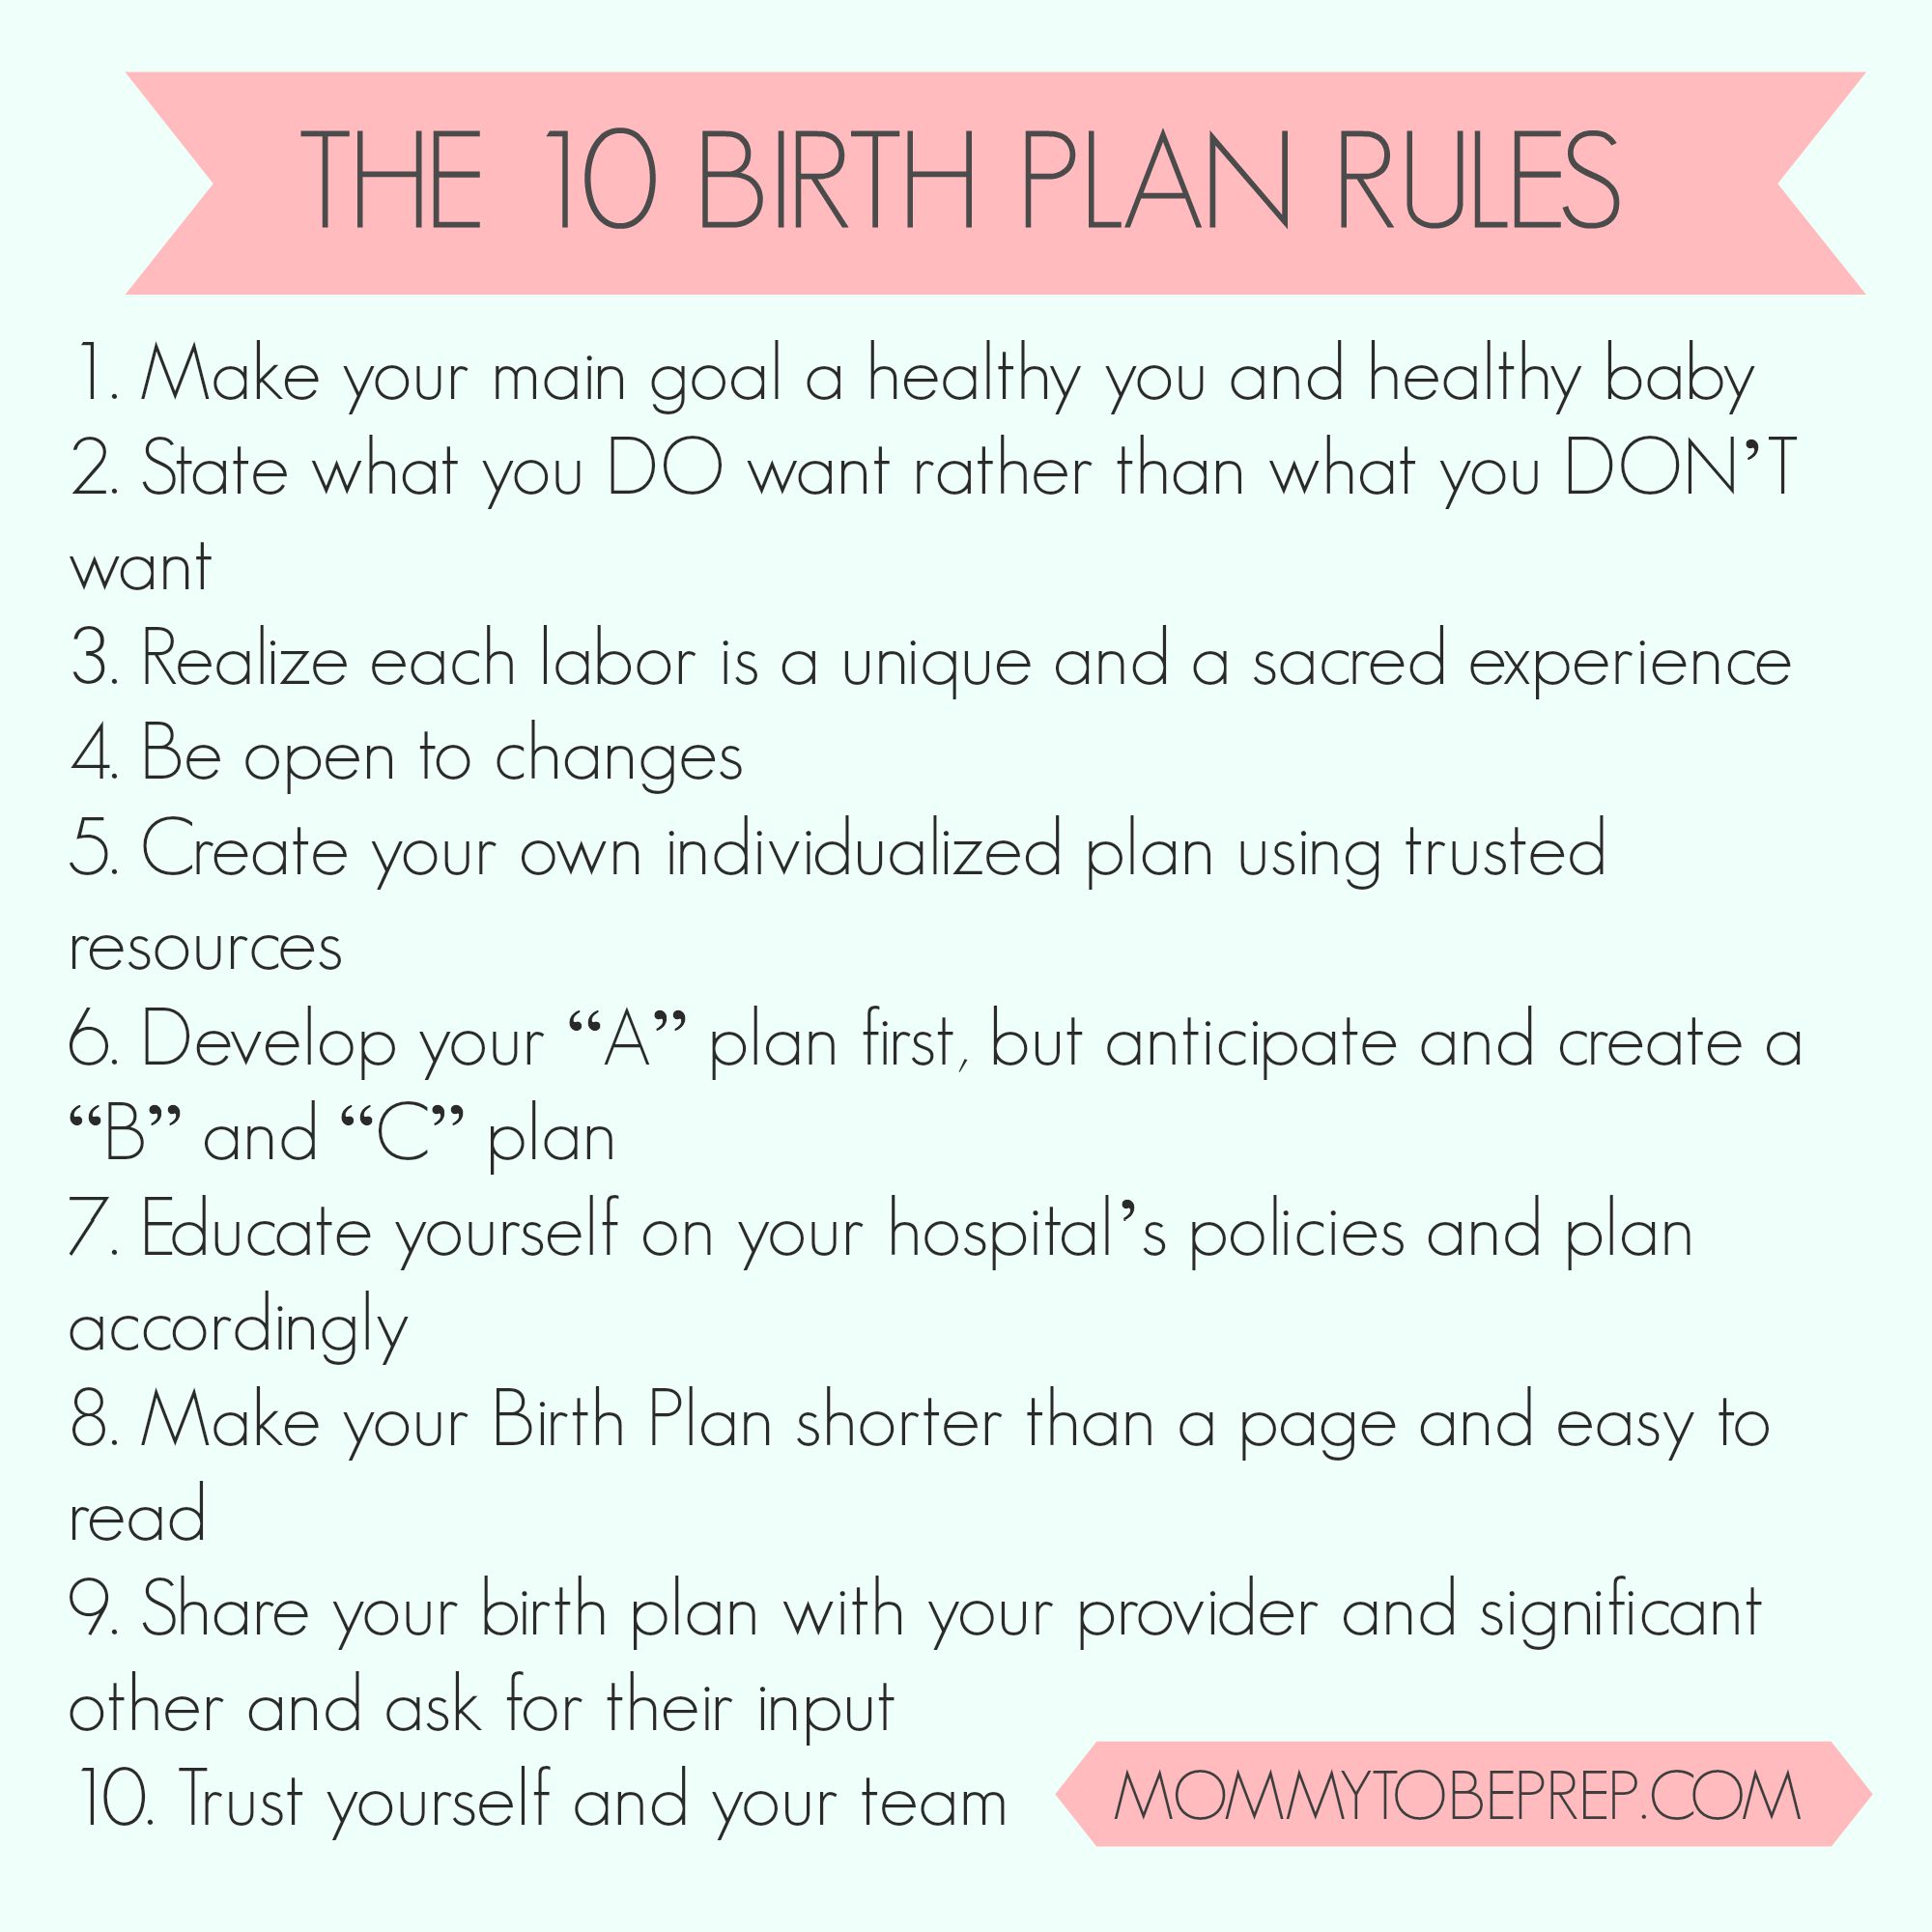 The 10 Birth Plan Rules